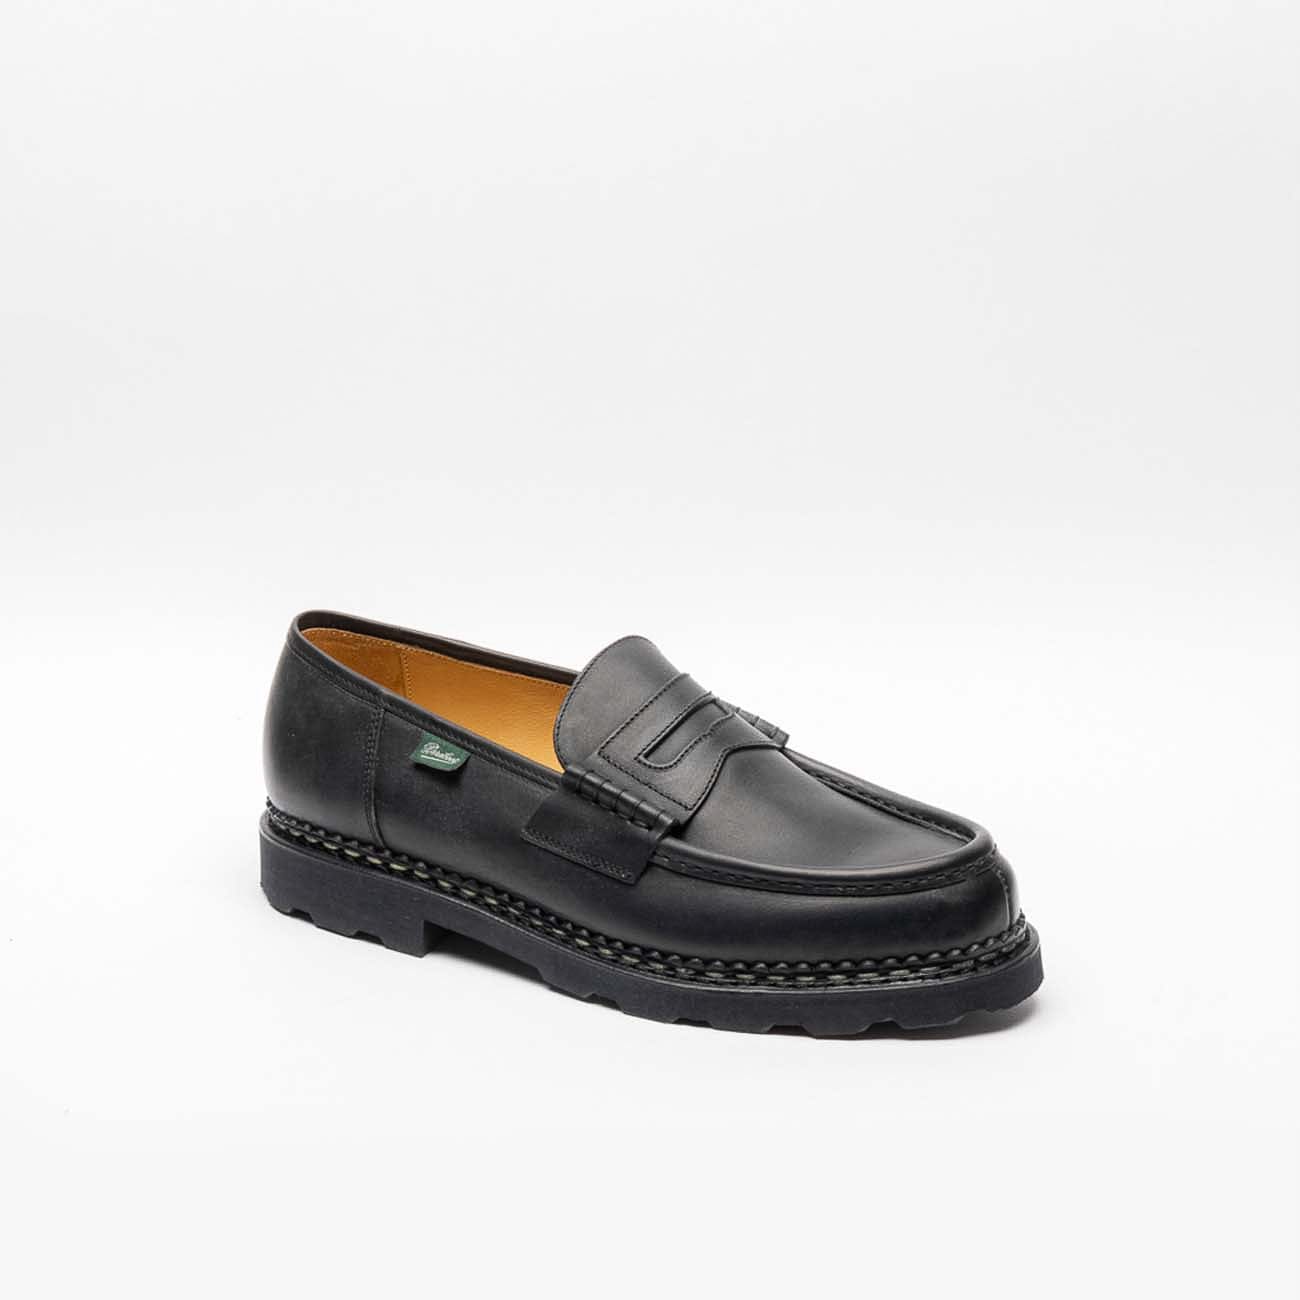 Reims Marche Black Leather Loafer